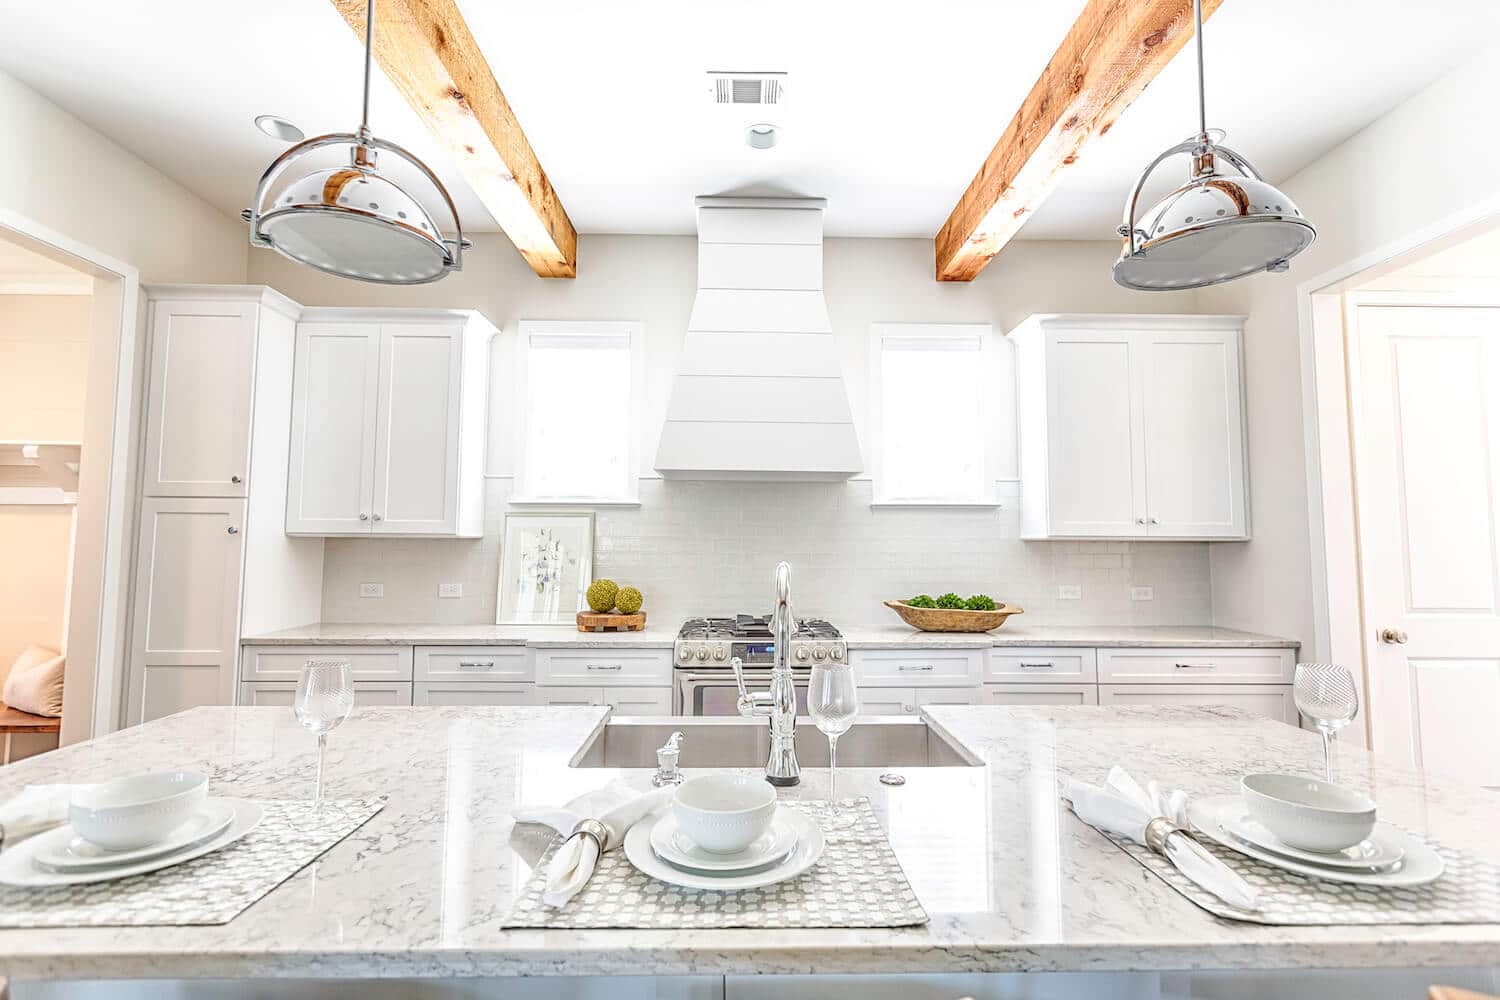 How to Clean Kitchen Countertops